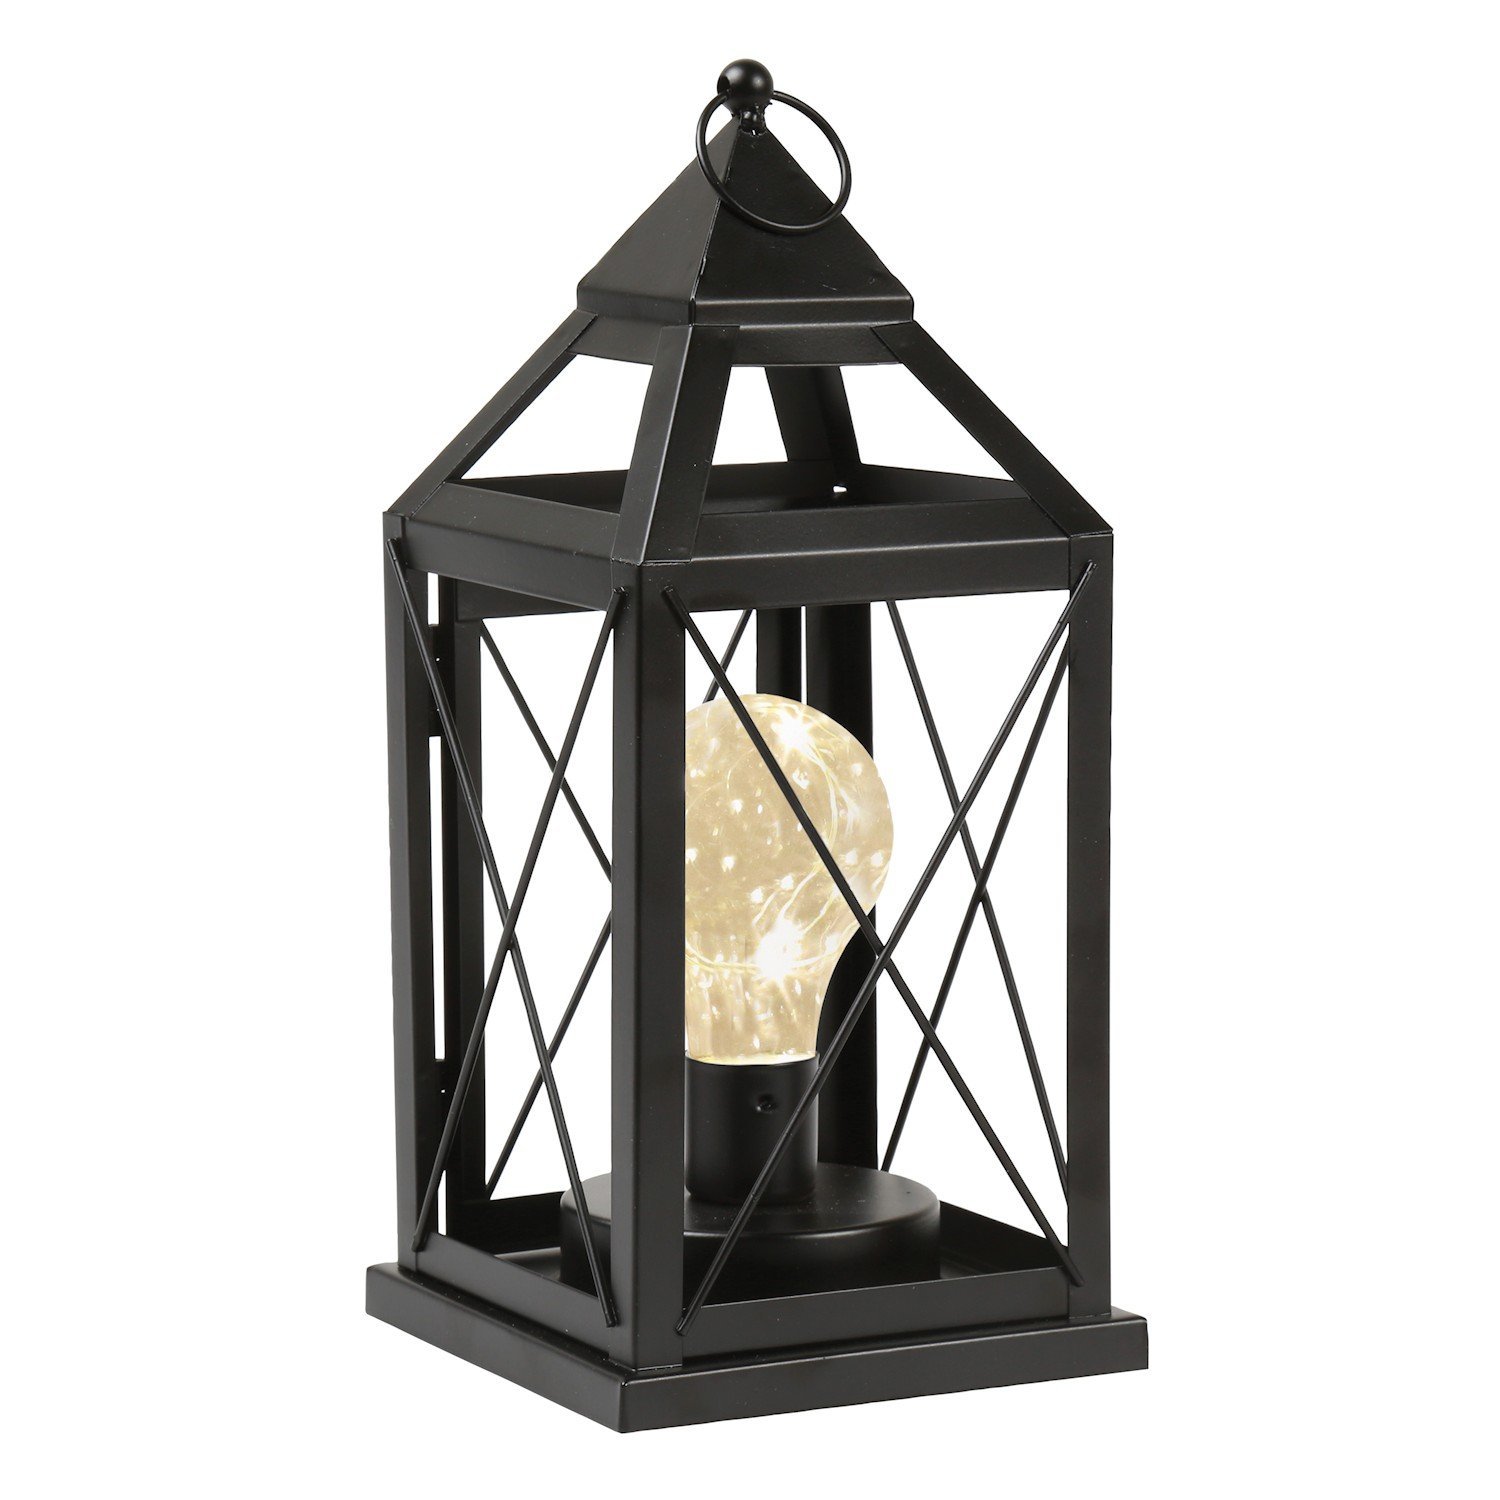 GM11218 Metal Cage Style Desk Decorative Camping Lights